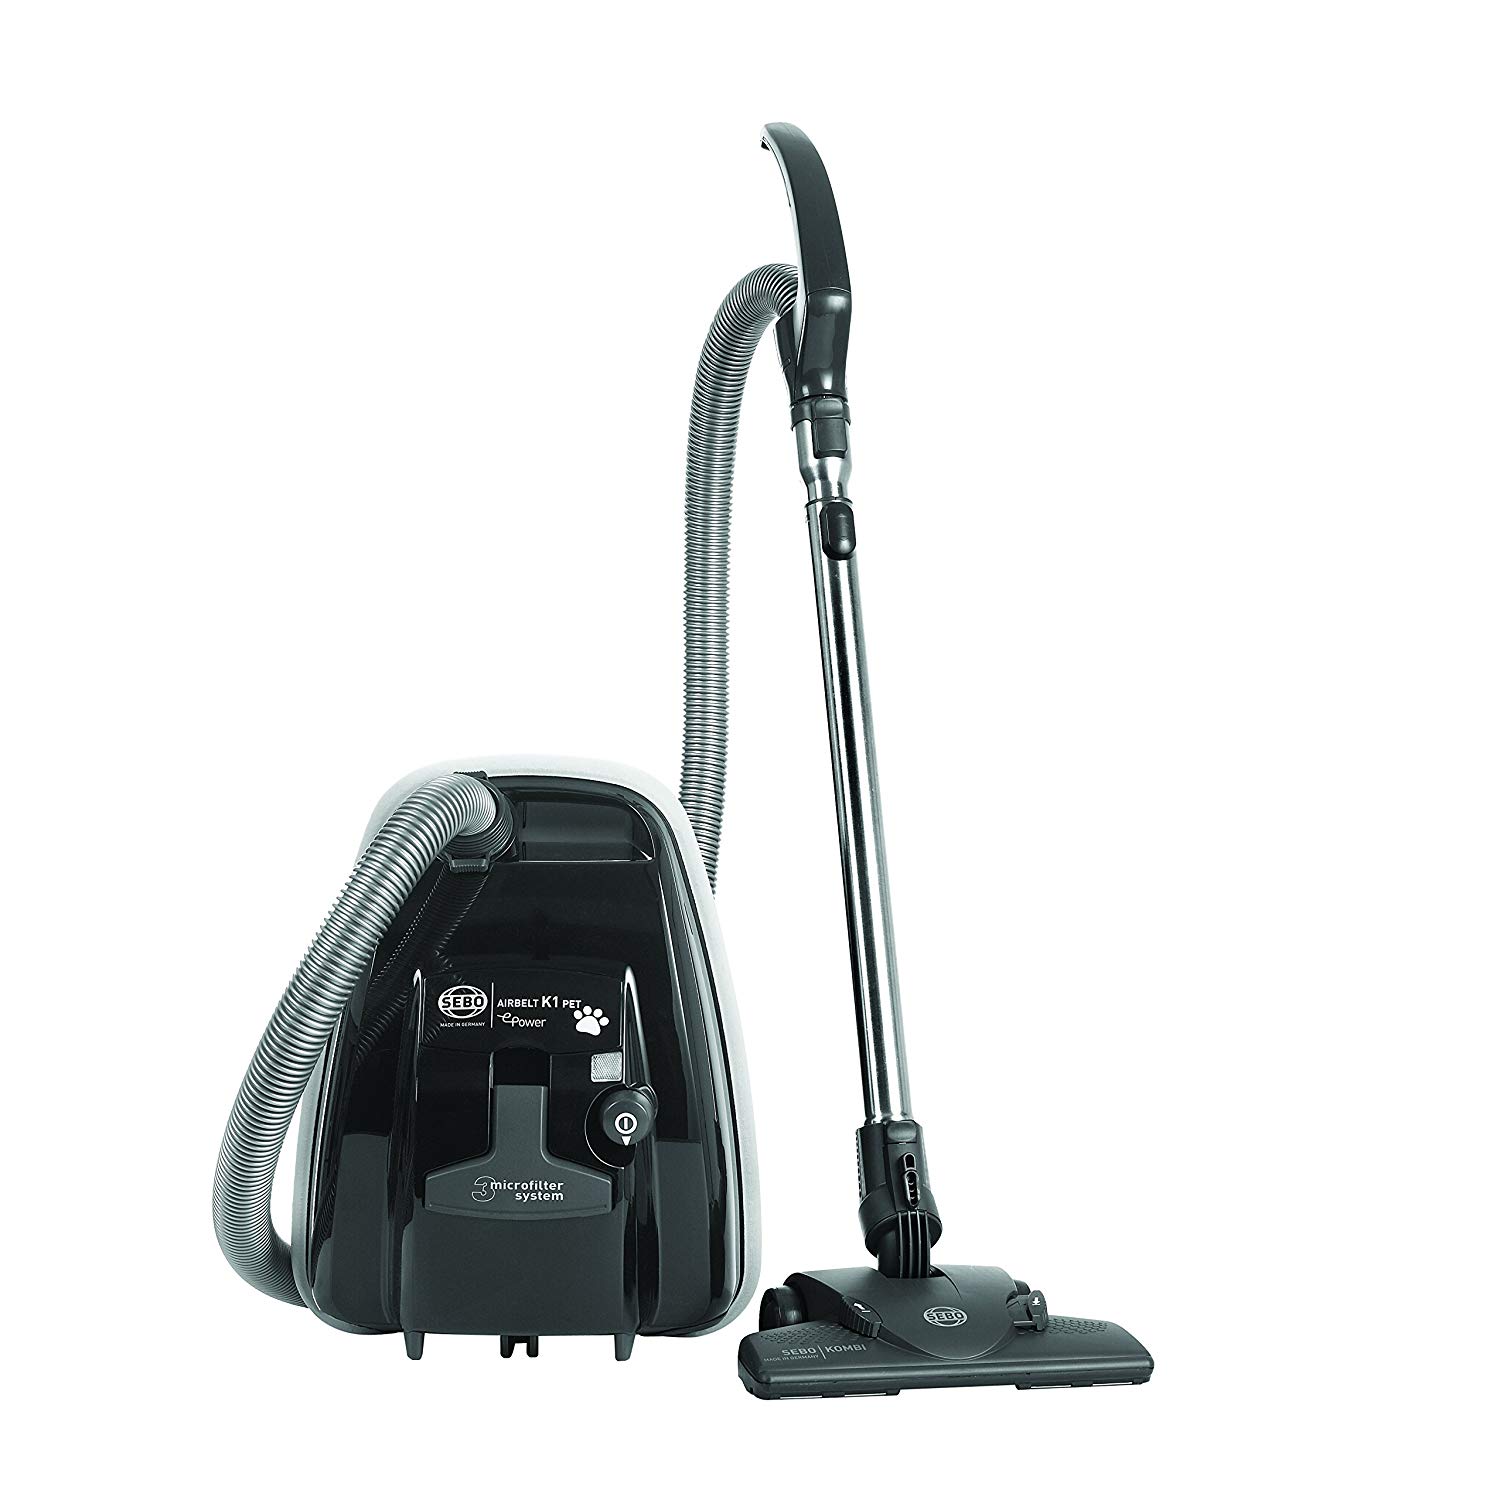 Sebo K1 Pet, Vacuum cleaner Reviews and Comments